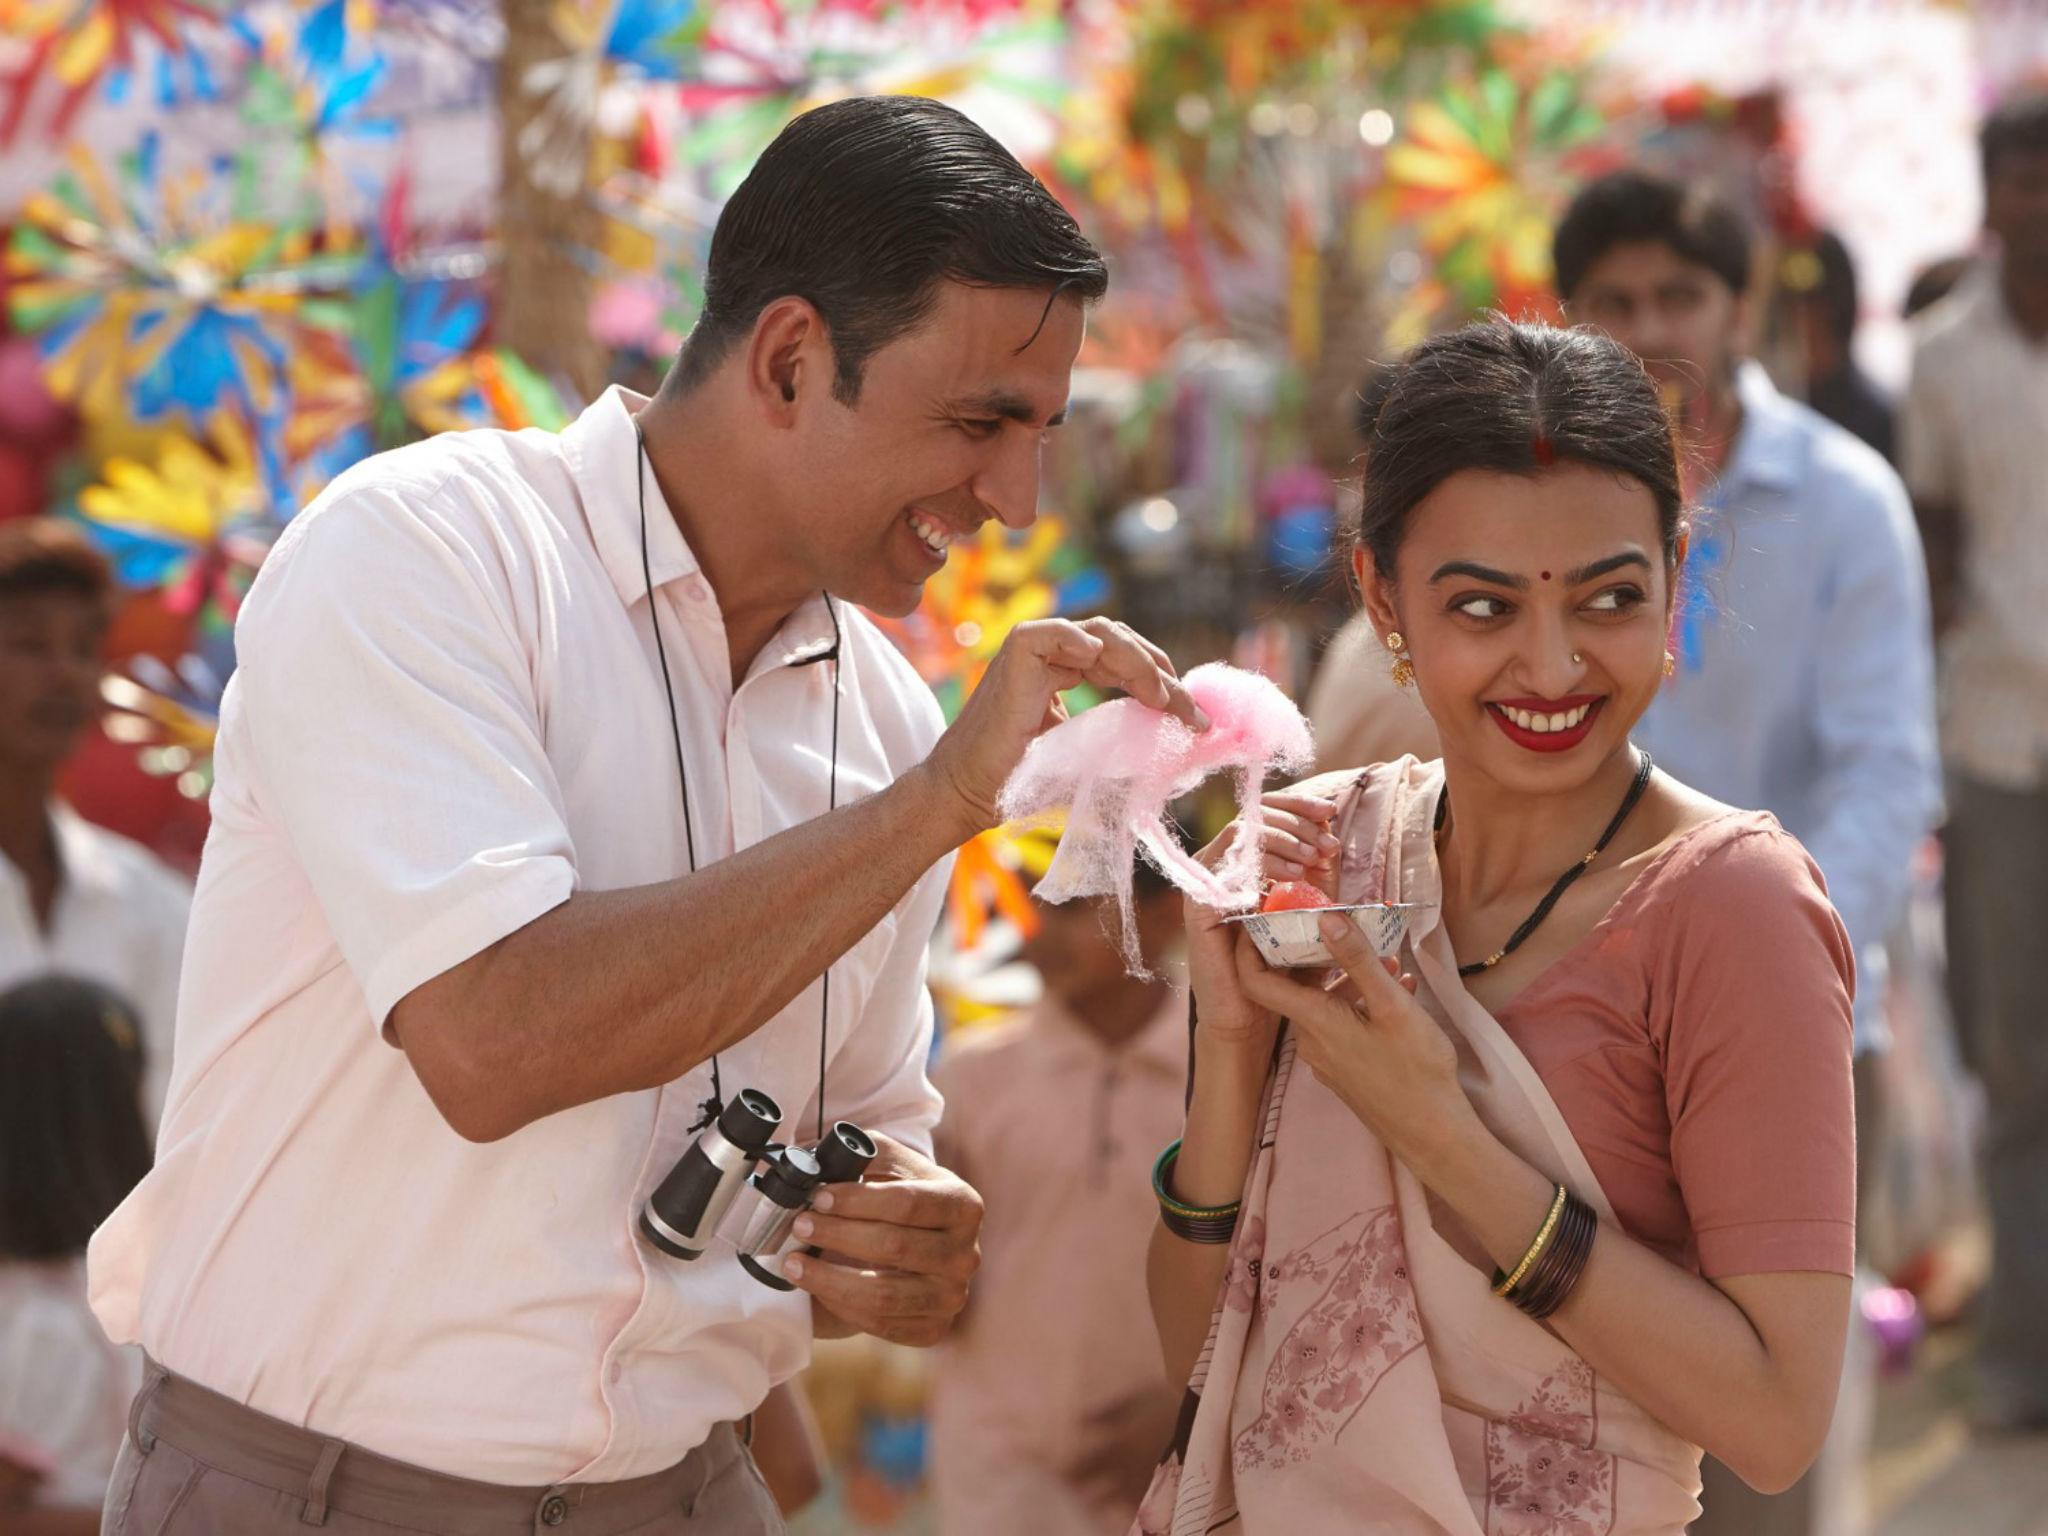 Kumar and Radhika Apte in the new film, which the producer hopes will raise awareness of an issue with serious health implications